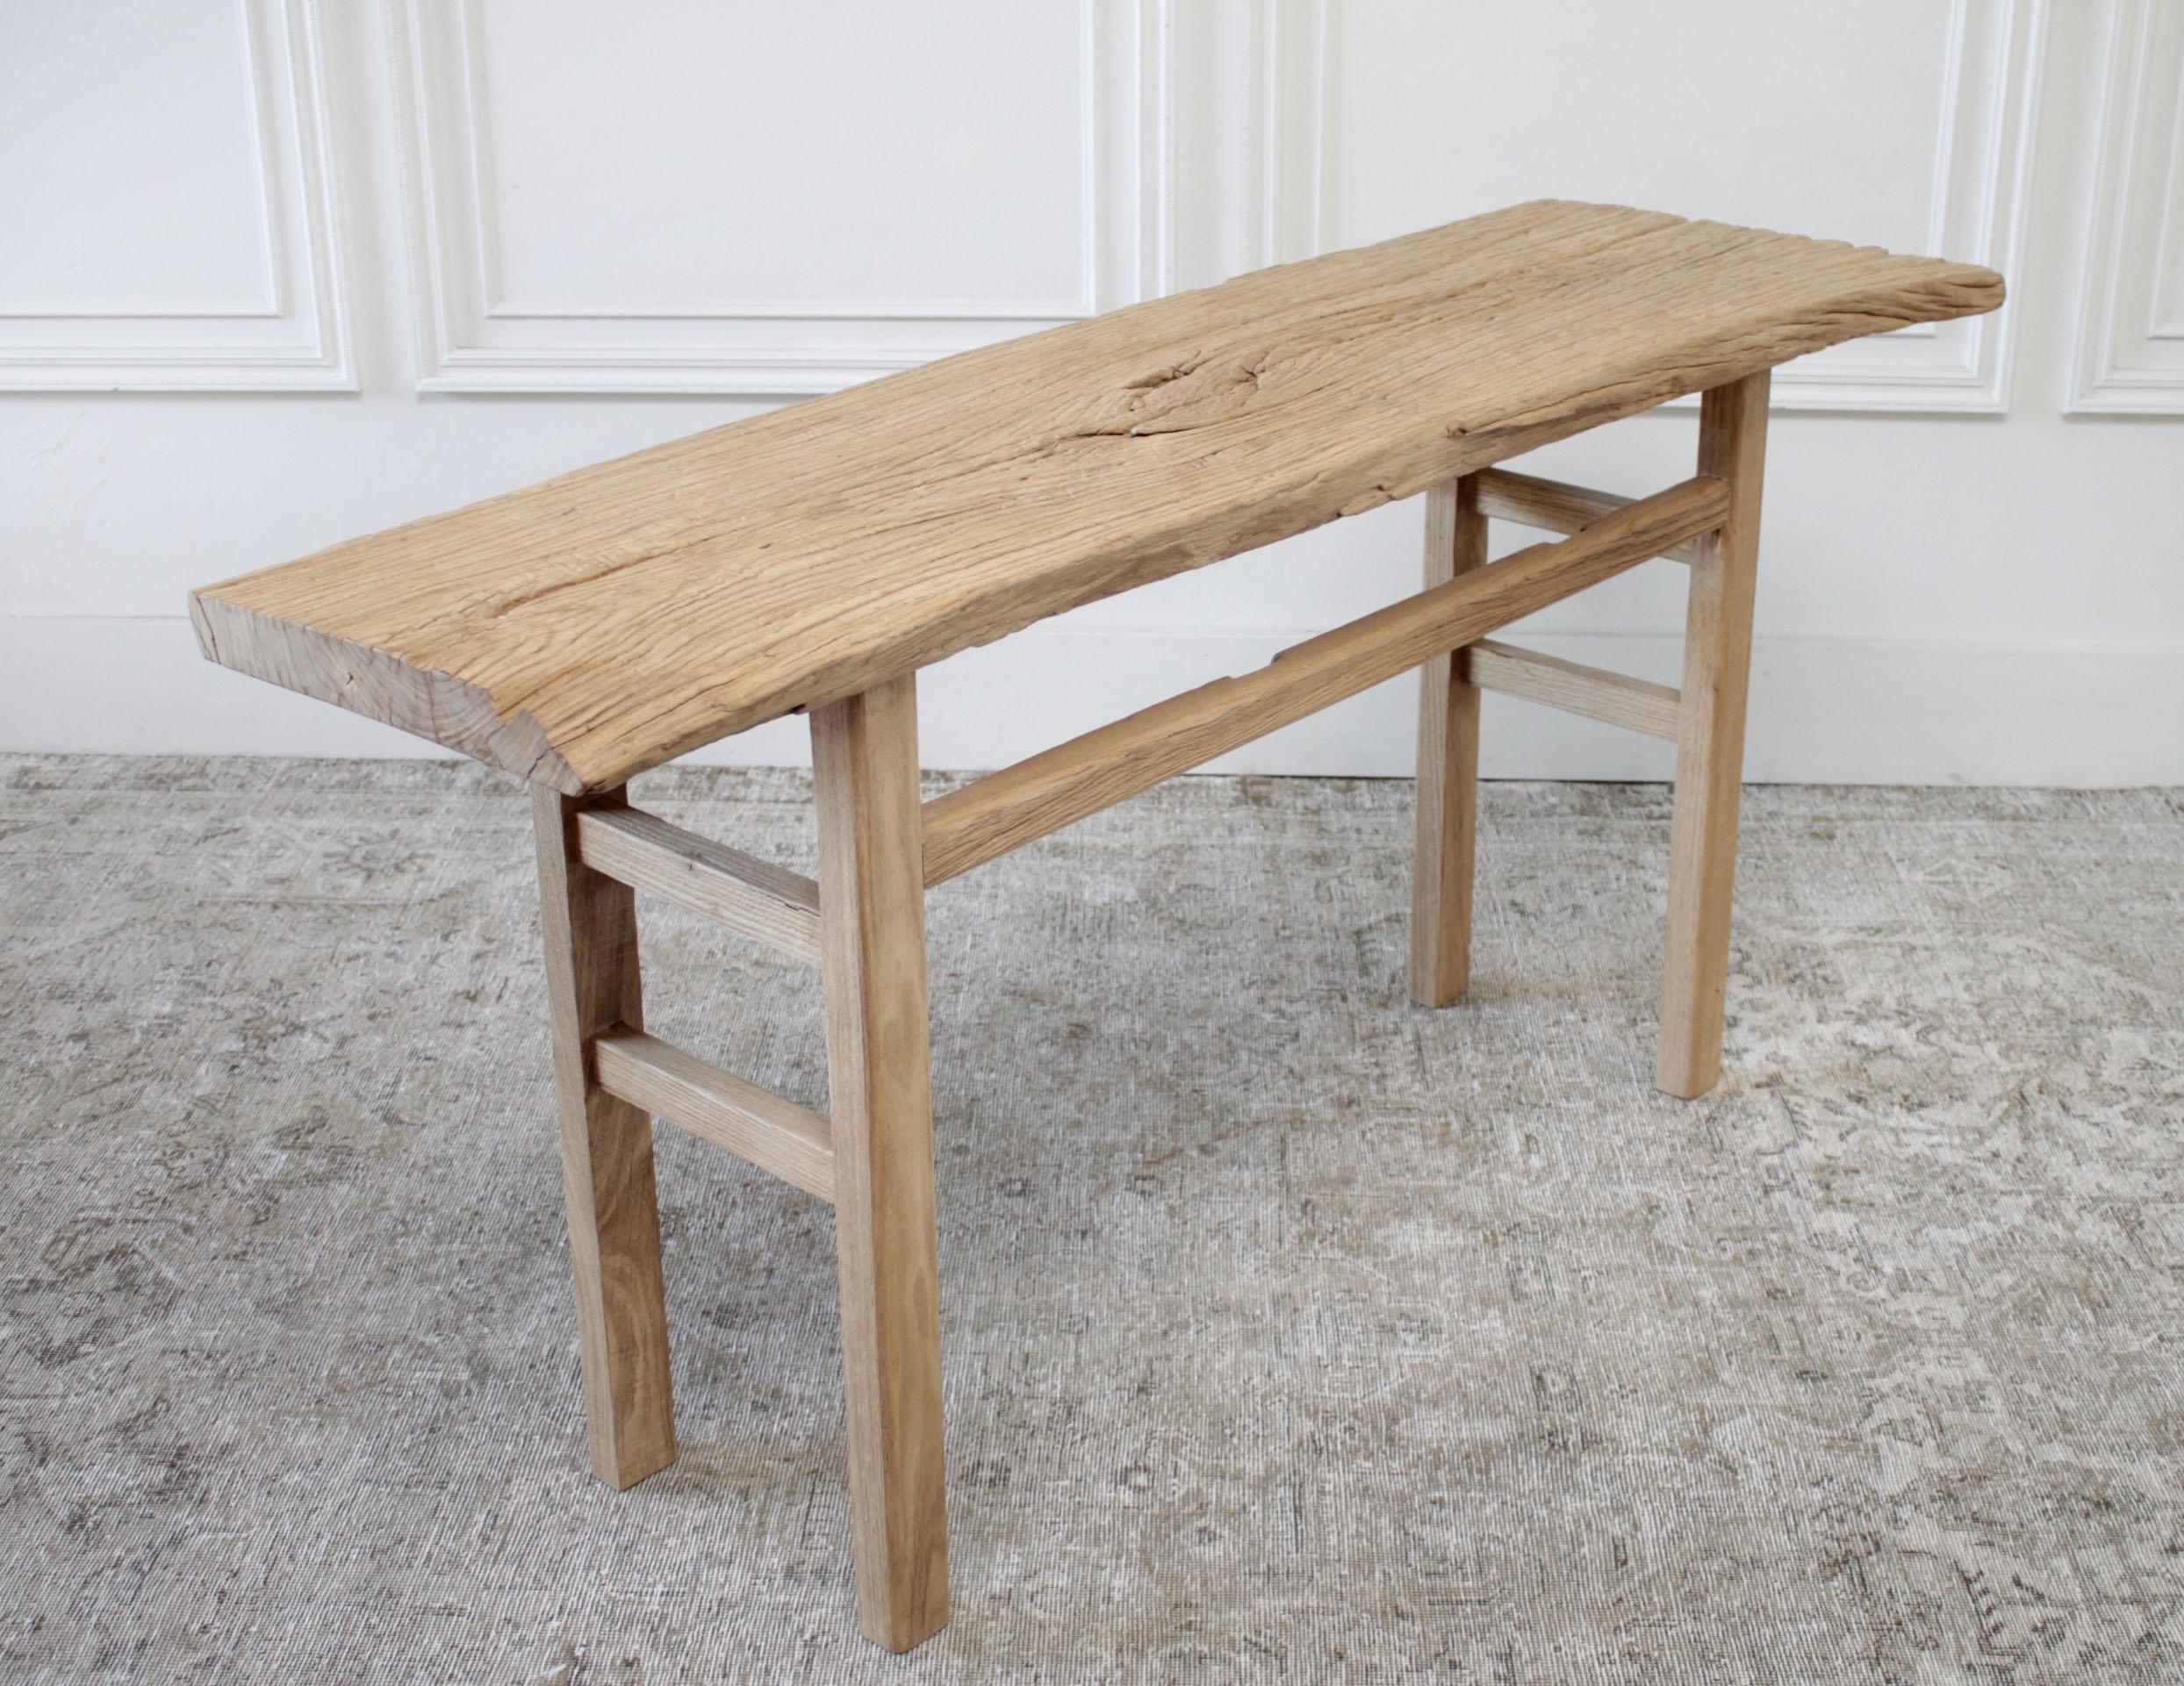 Antique elm wood plank console table
Vintage table has a natural edge, the shape of the tabletop is slightly wider on one side, as you can see the shape of the tree. Legs are solid and sturdy, the table base is made from reclaimed elm timbers, with